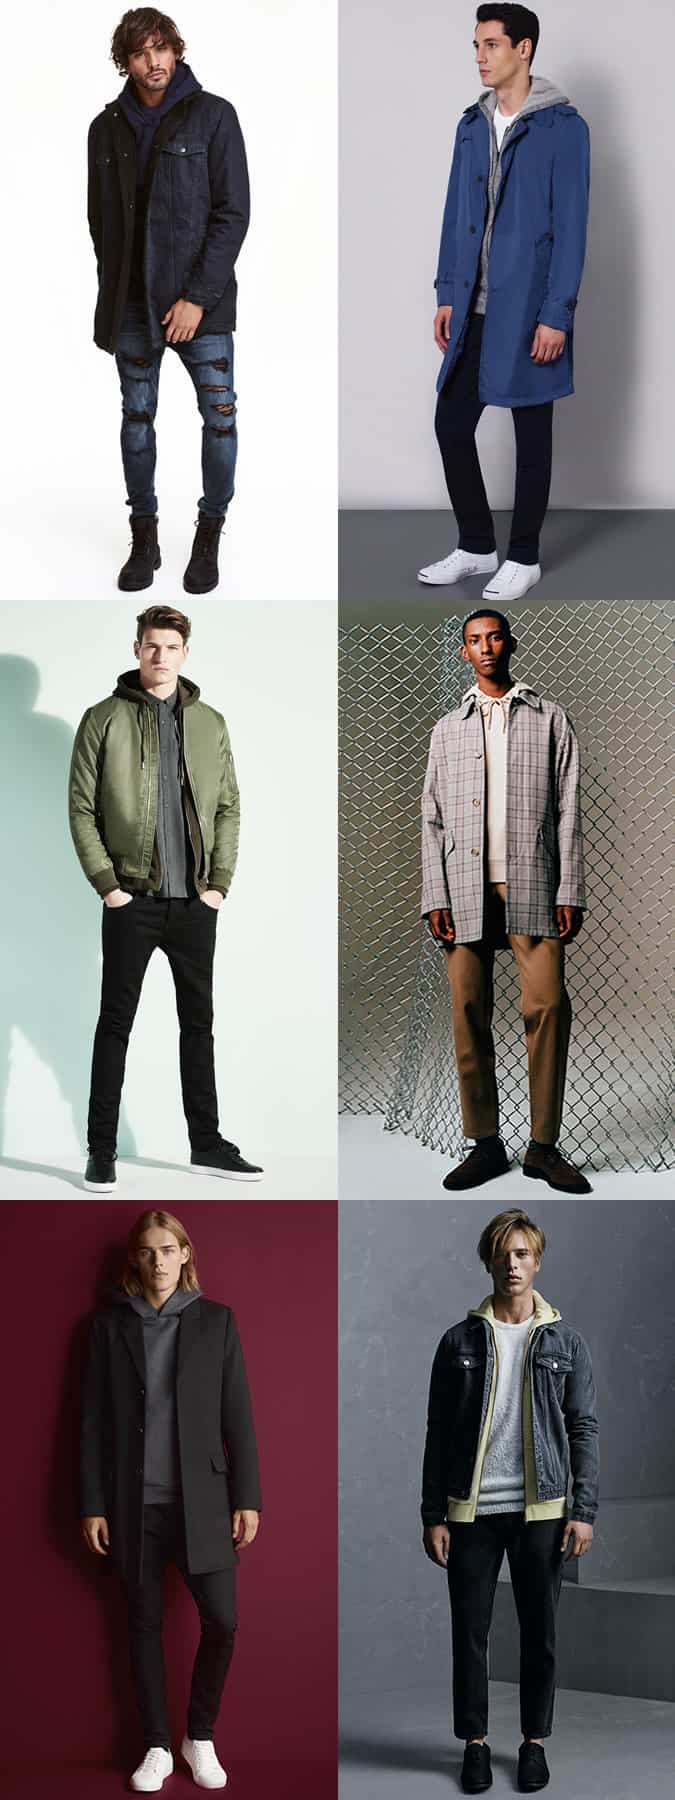 Men's Layered Hoodies Outfit Inspiration Lookbook